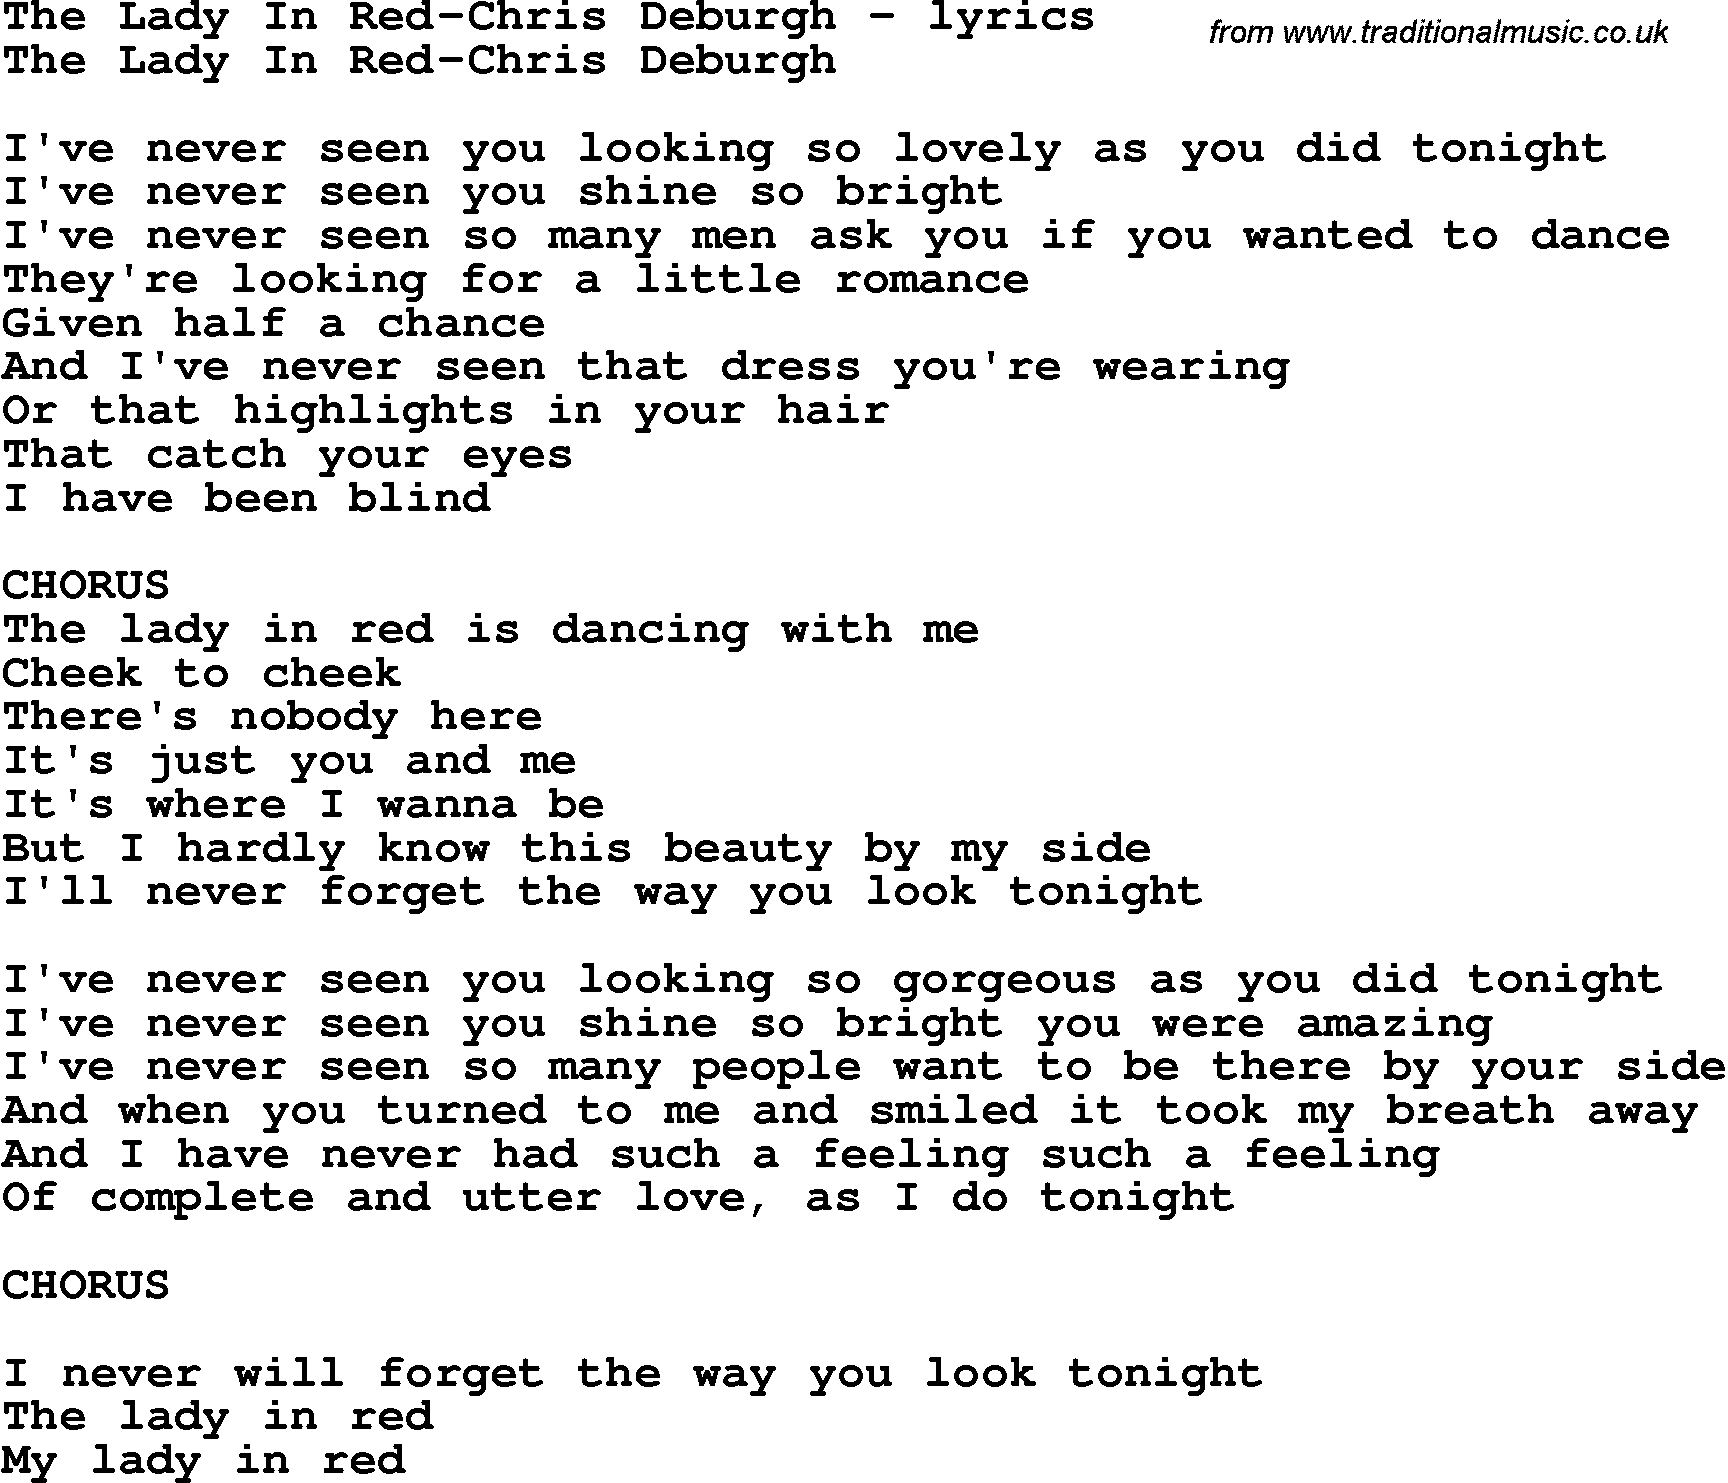 Love Song Lyrics for: The Lady In Red-Chris Deburgh